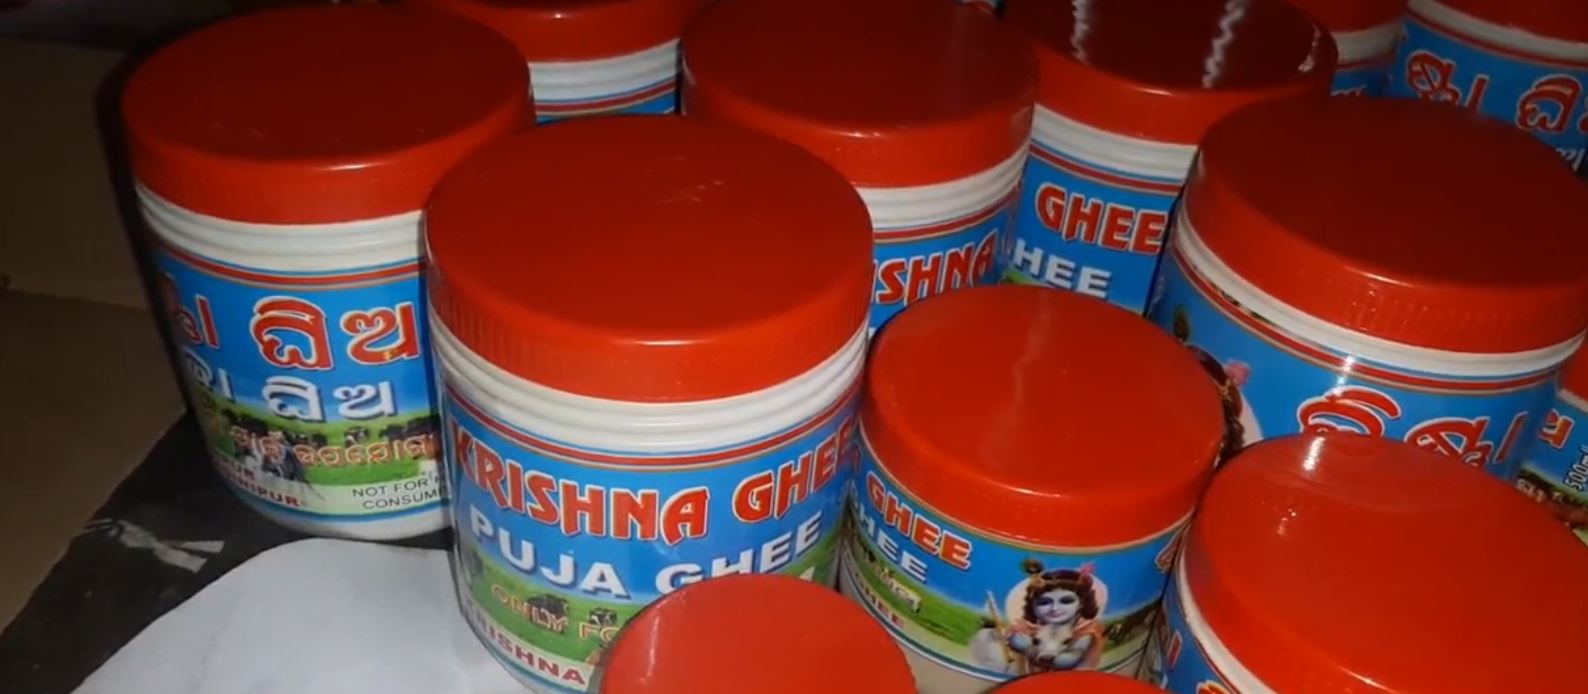 Impure Ghee Factory Busted In Cuttack City